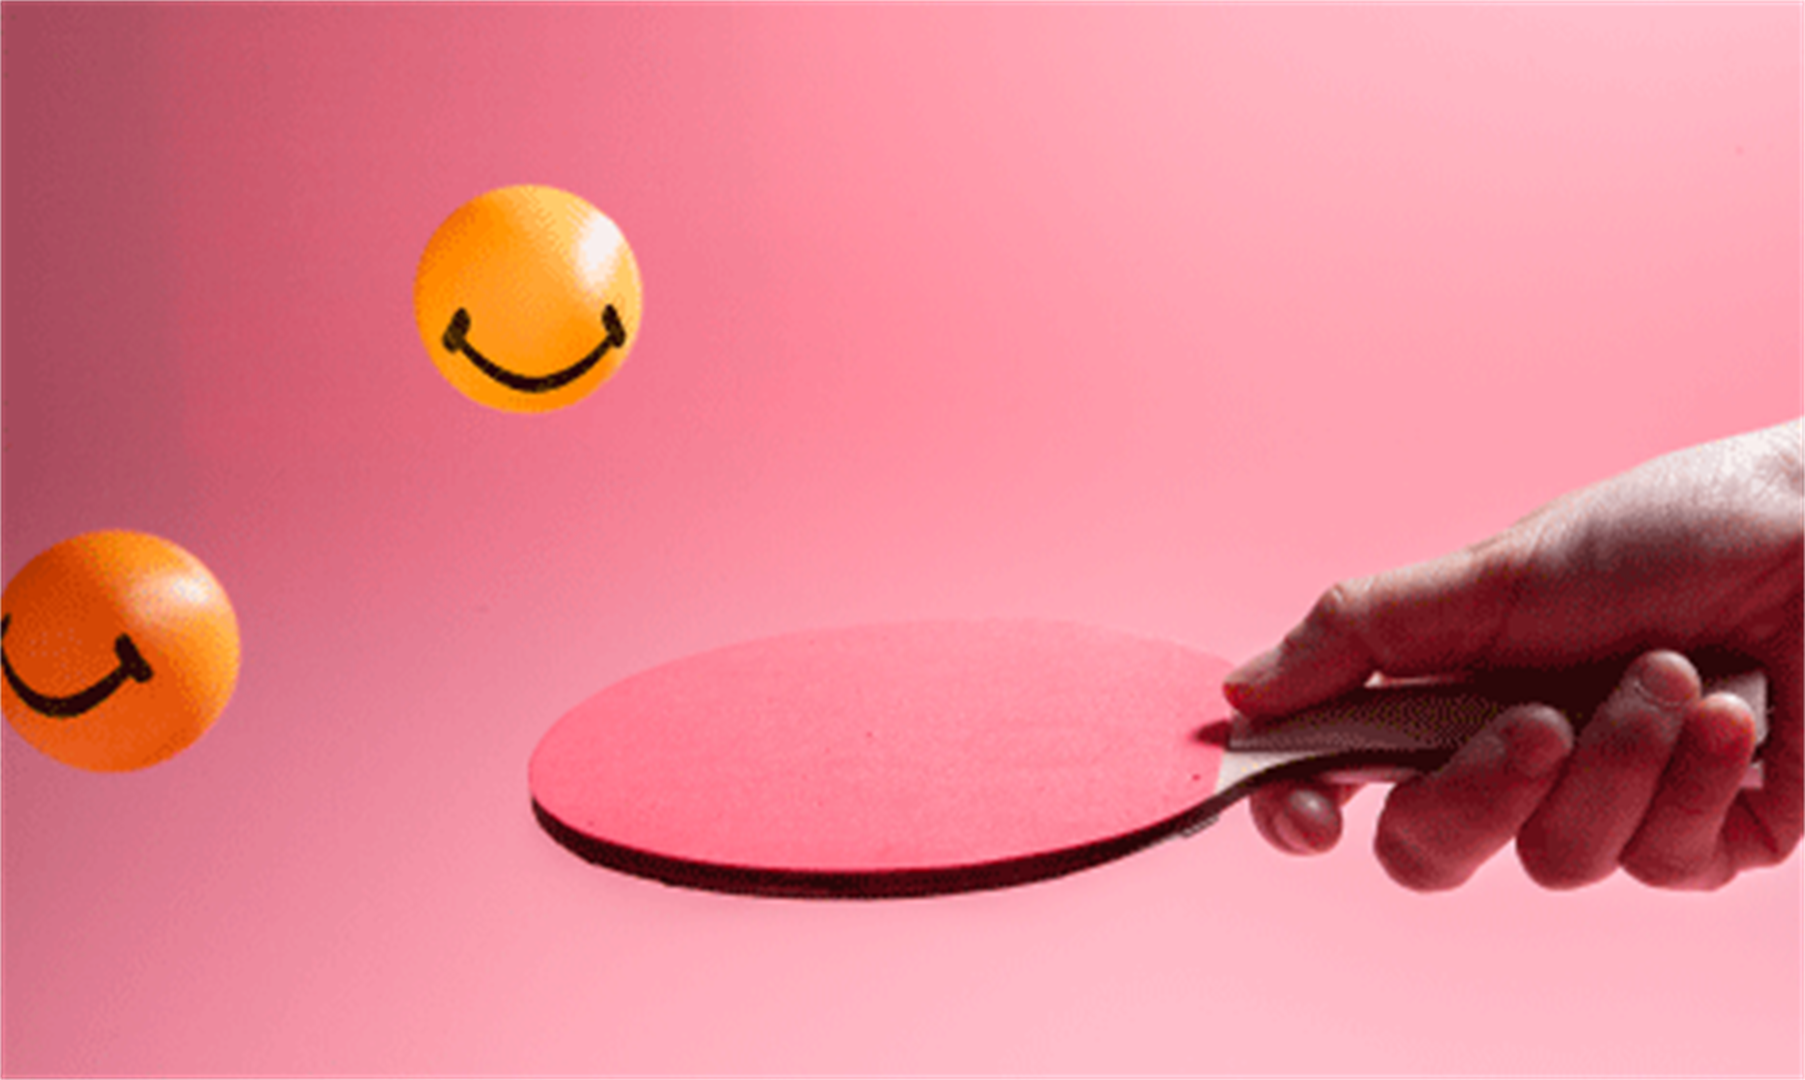 A person holding a table tennis bat against a pink backdrop